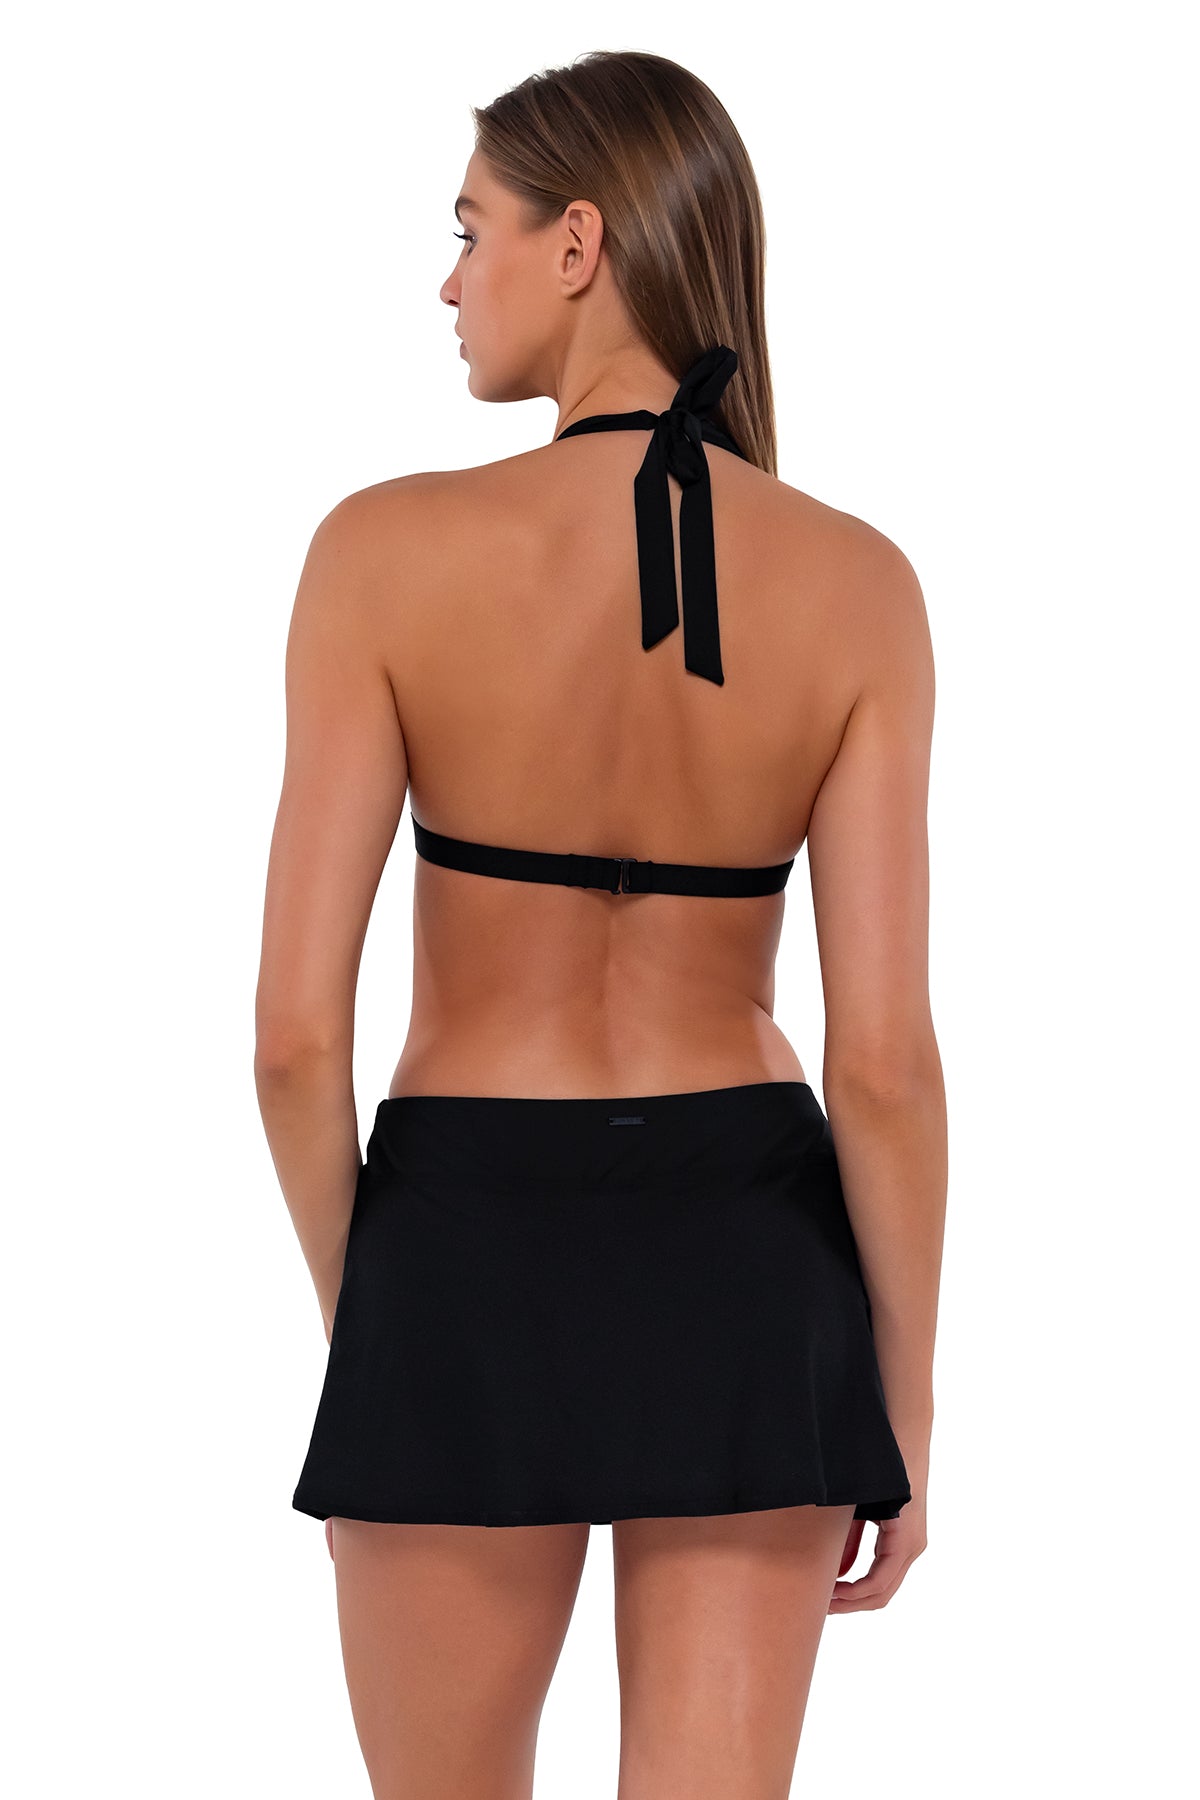 Lotus Sporty Swim Skirt, Mid-Rise with Built-in Bottom, Sunsets